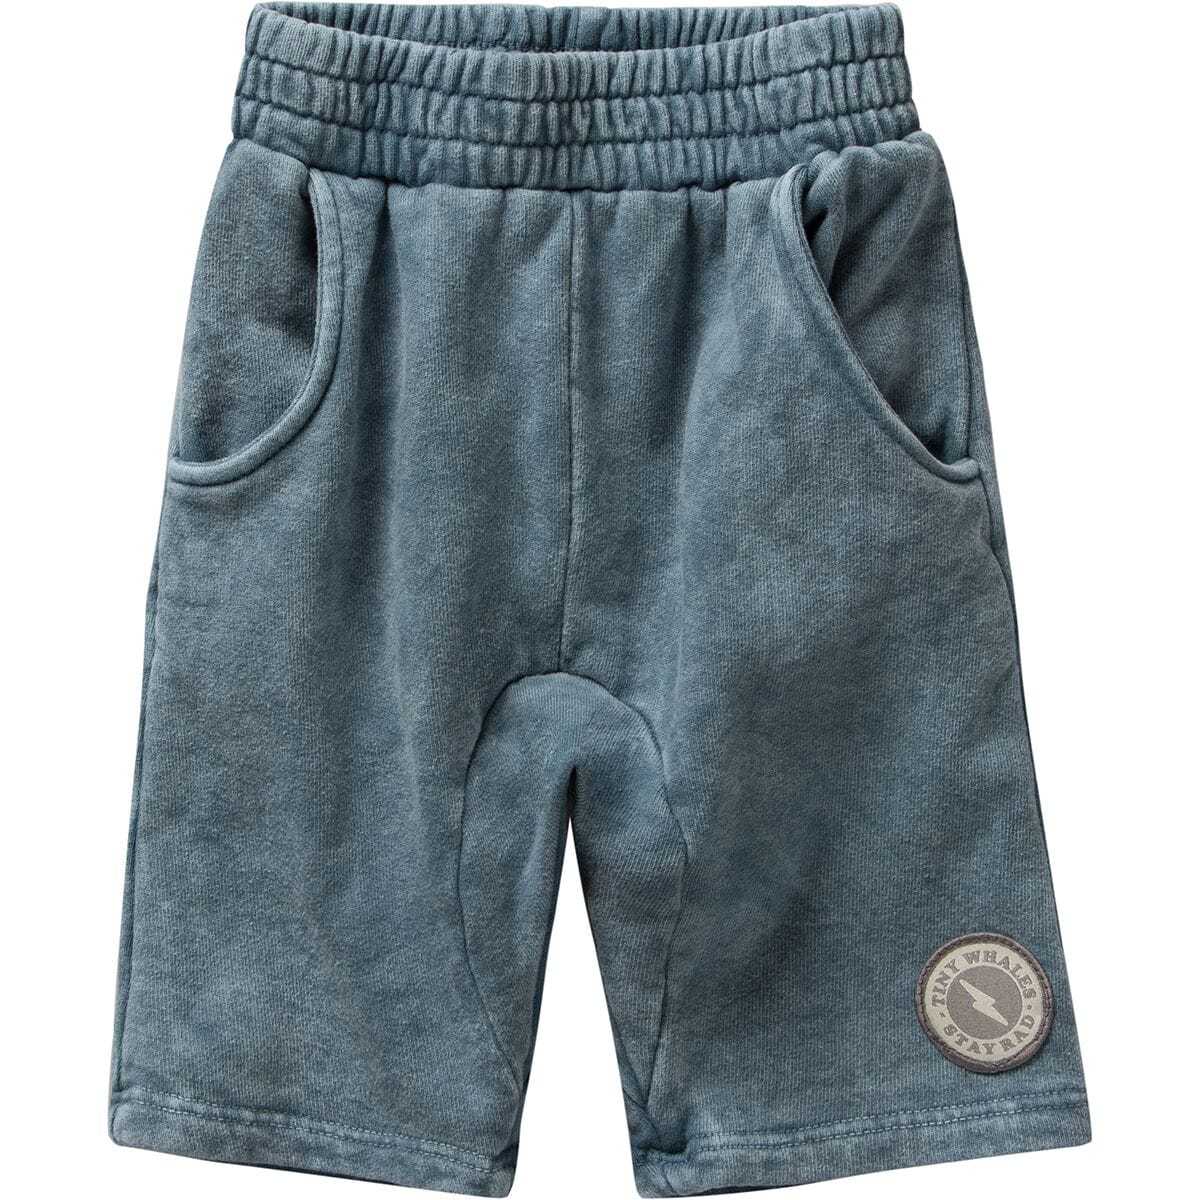 Tiny Whales Rogue Sweatshort - Toddlers'